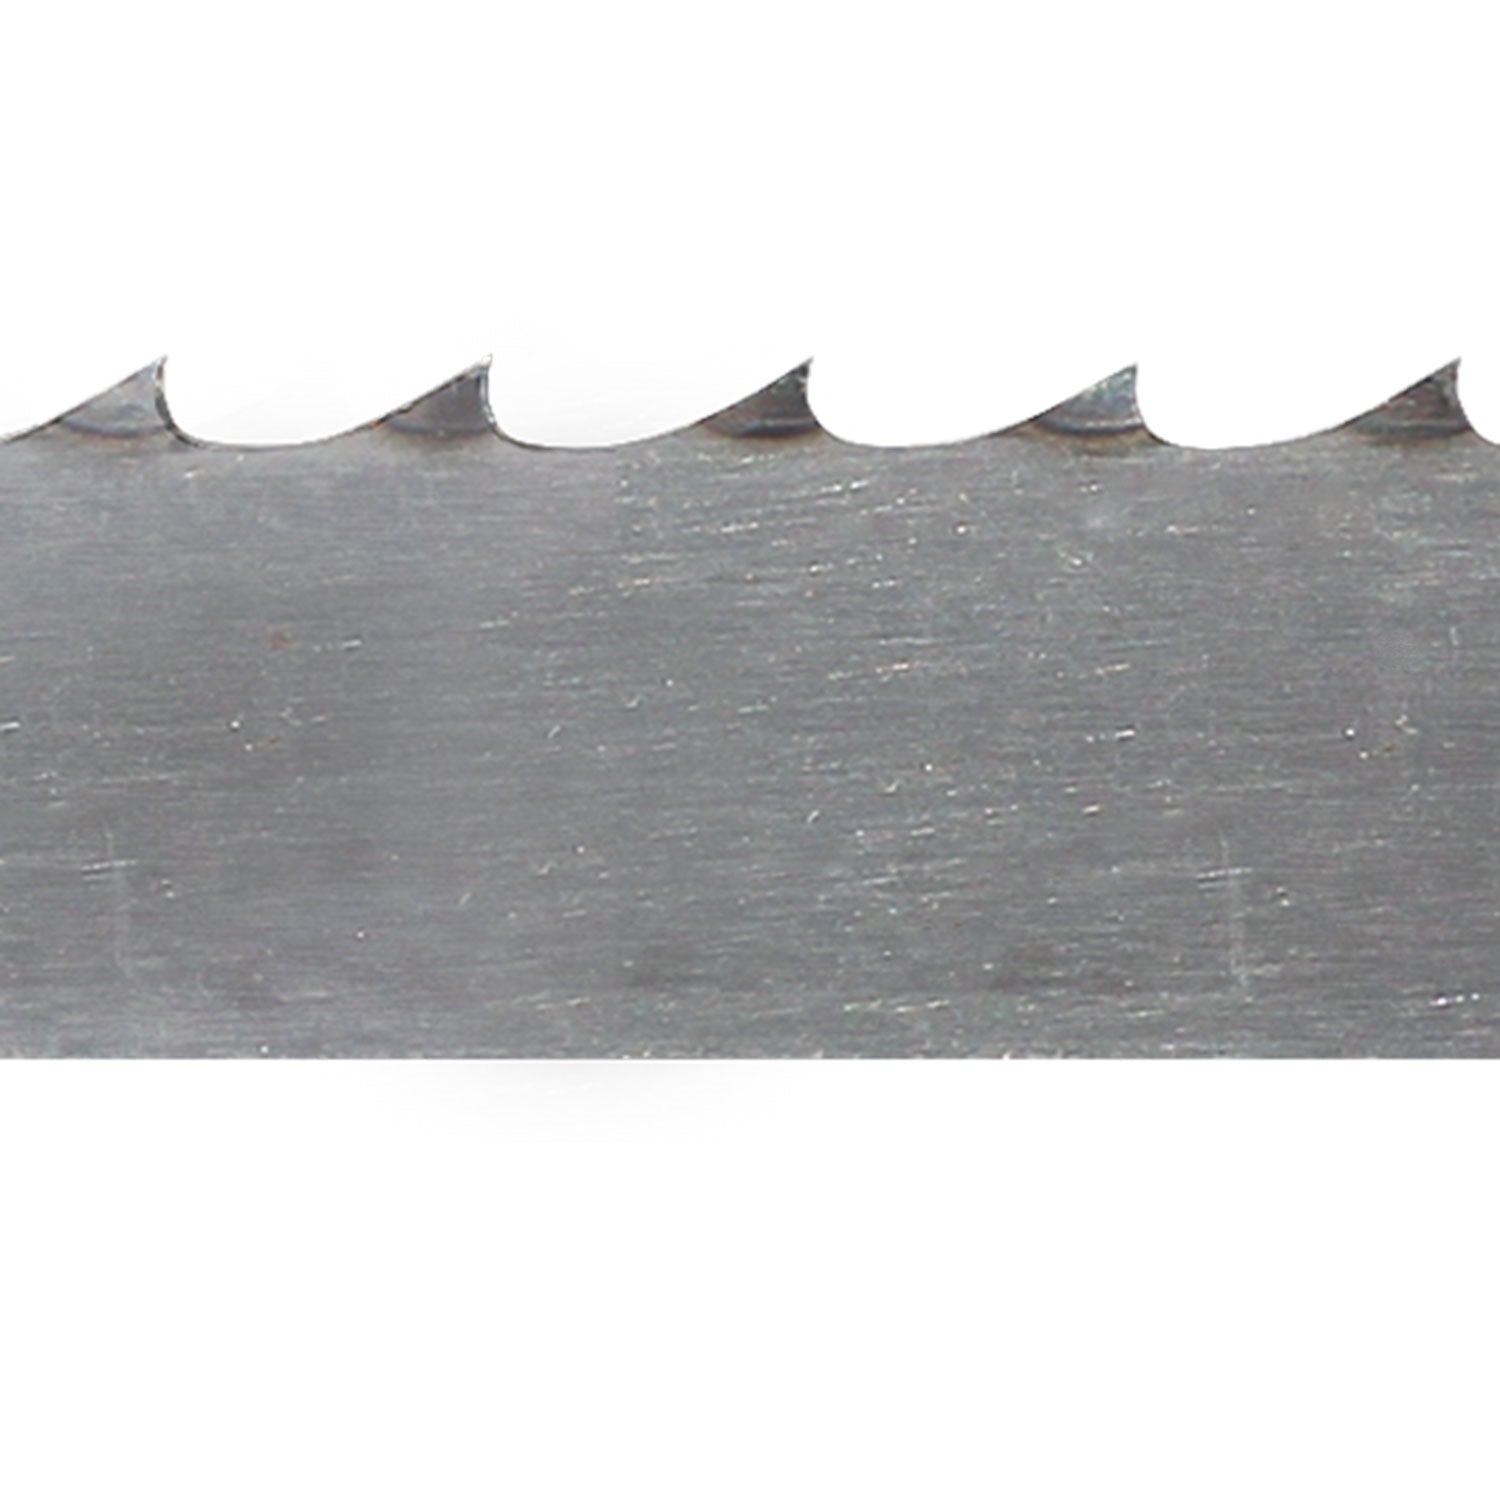 Meat Band Saw Blade - One Way® Portion Control - 124 in. x 5/8 in. x 0.022 in. x 3 TPI - Pack of 4